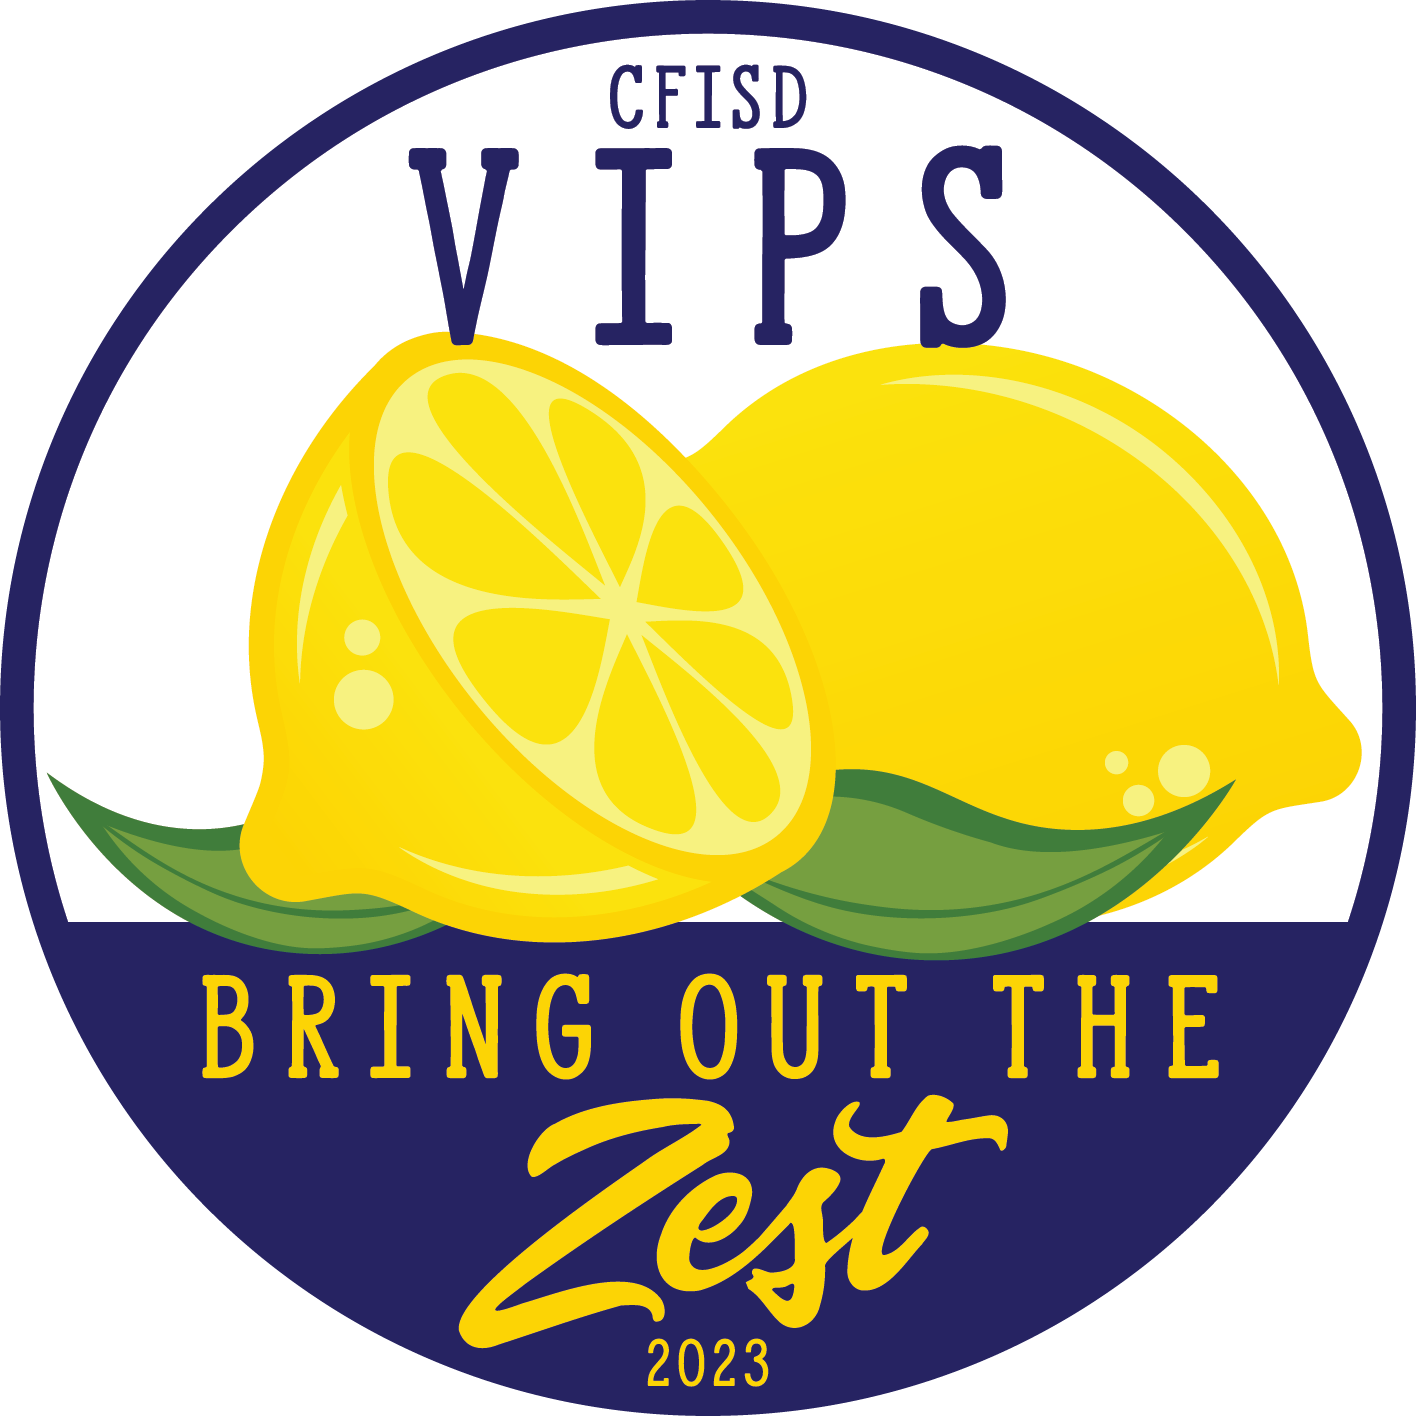 CFISD VIPS bring out the zest